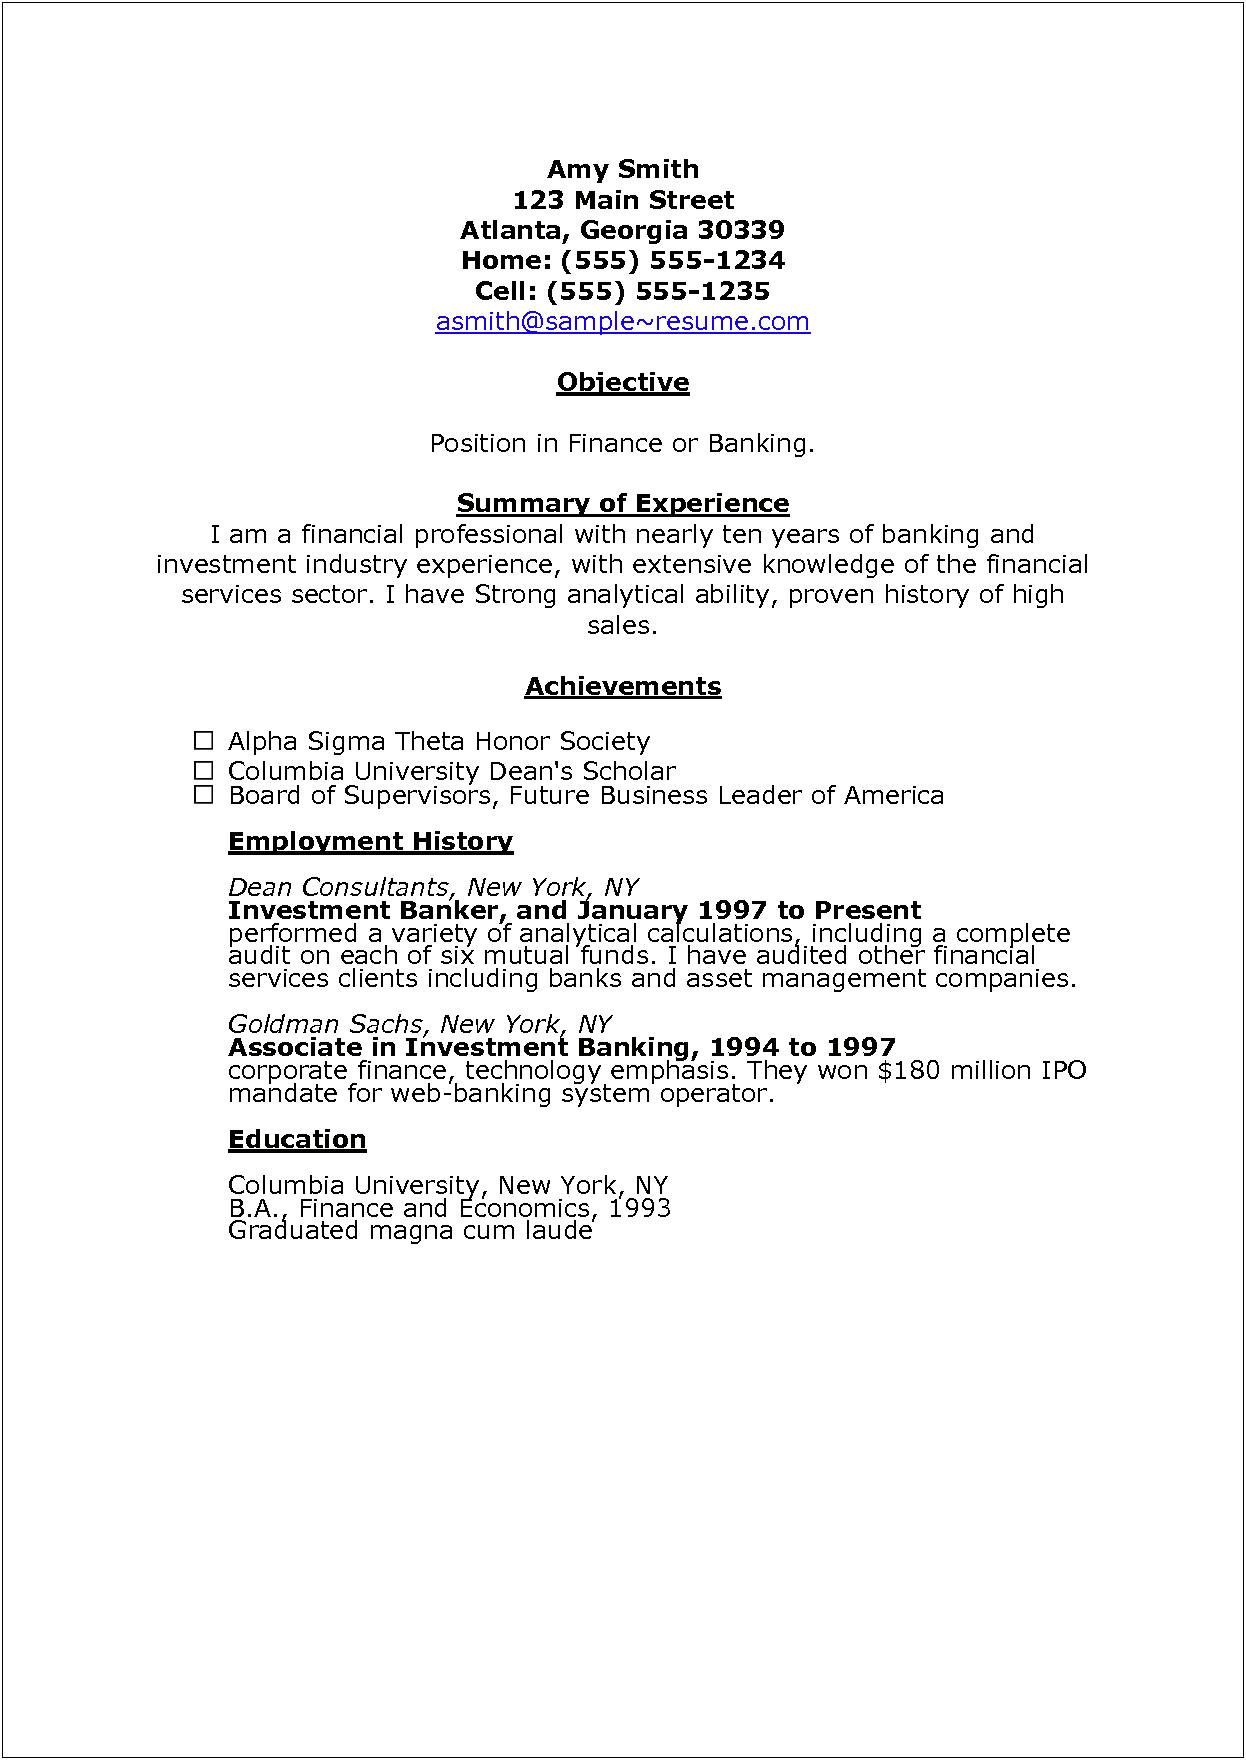 Examples Of Good Resumes And Bad Resumes